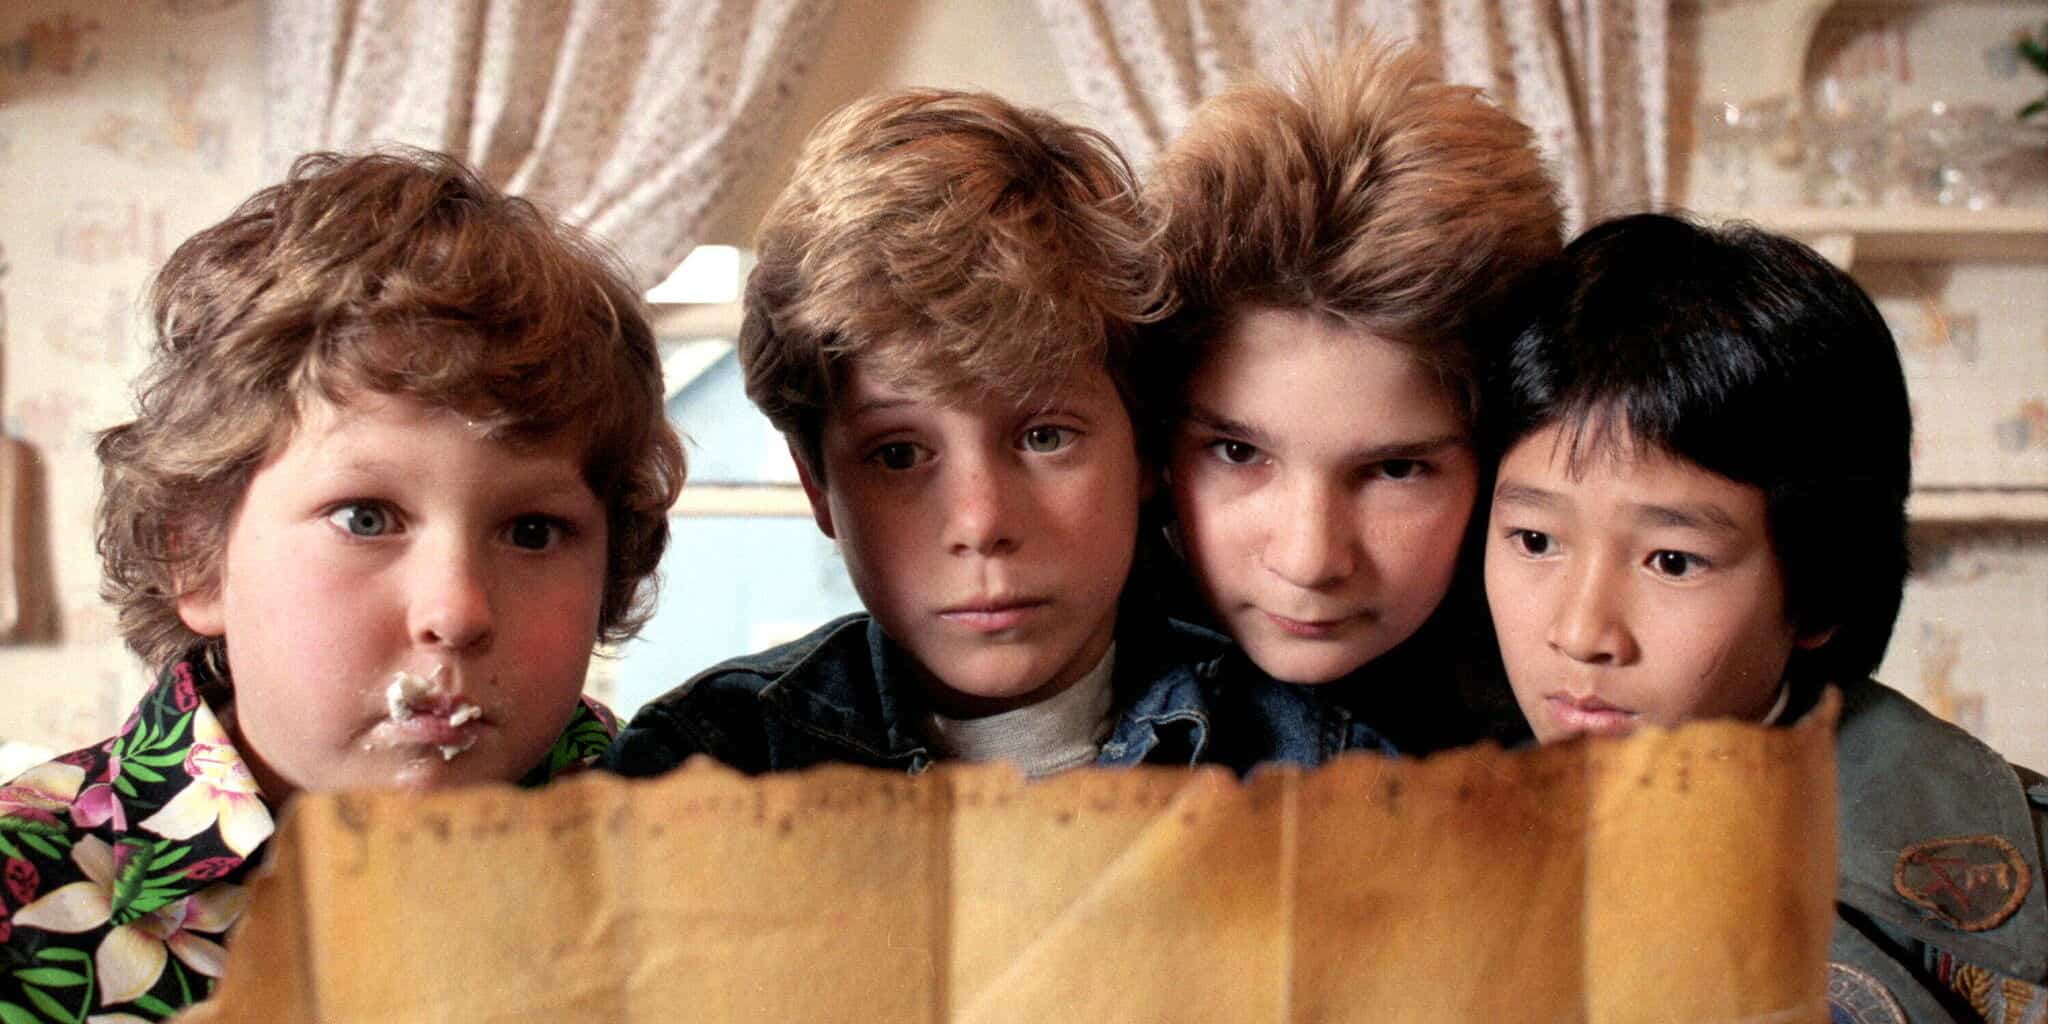 Four young boys look at a map in this image from Amblin Entertainment.